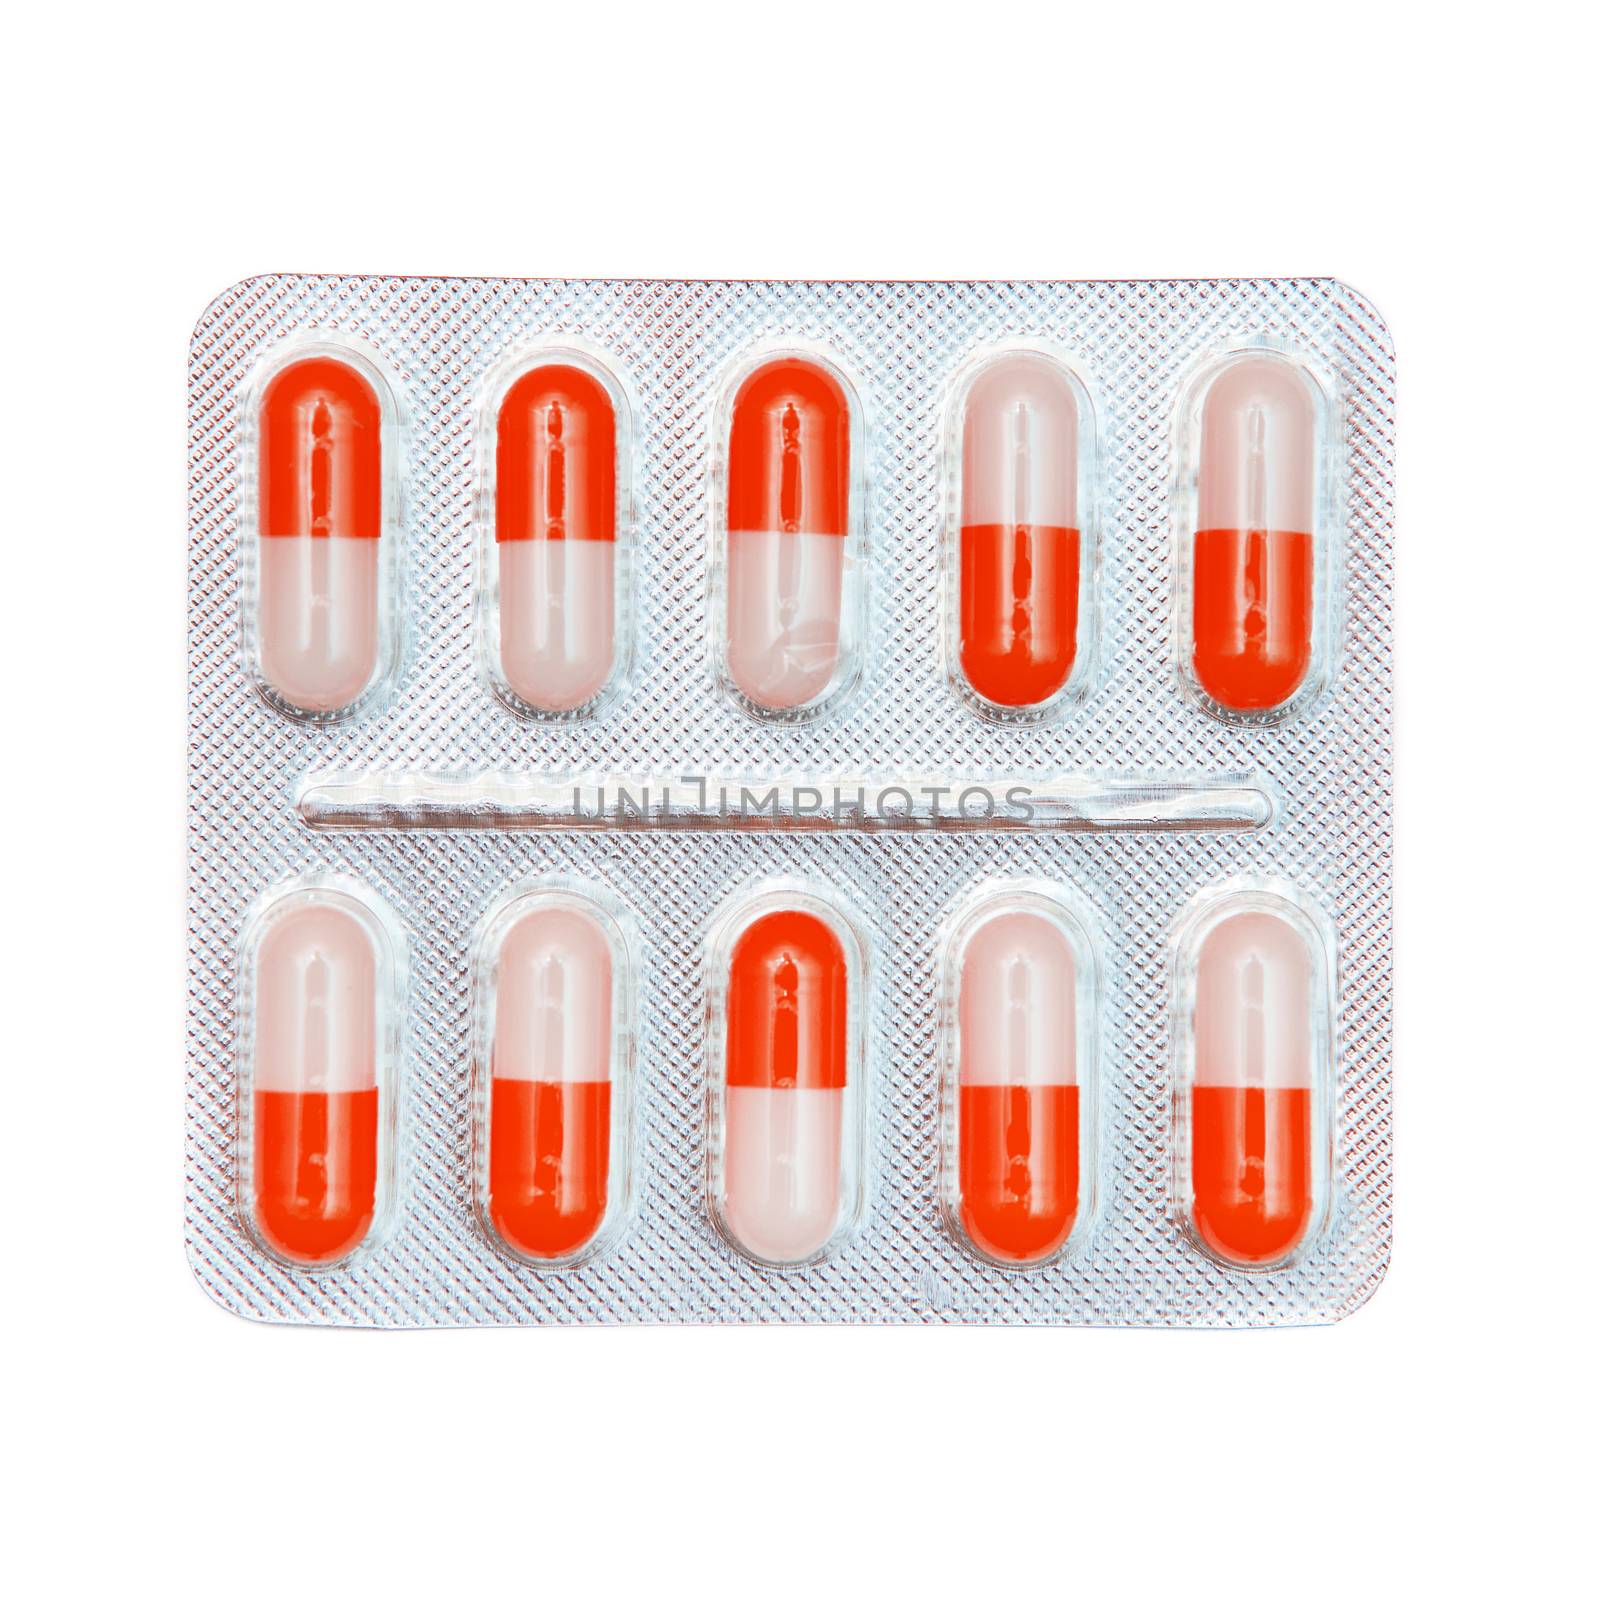 Blister pack of red and white capsules isolated on white background.